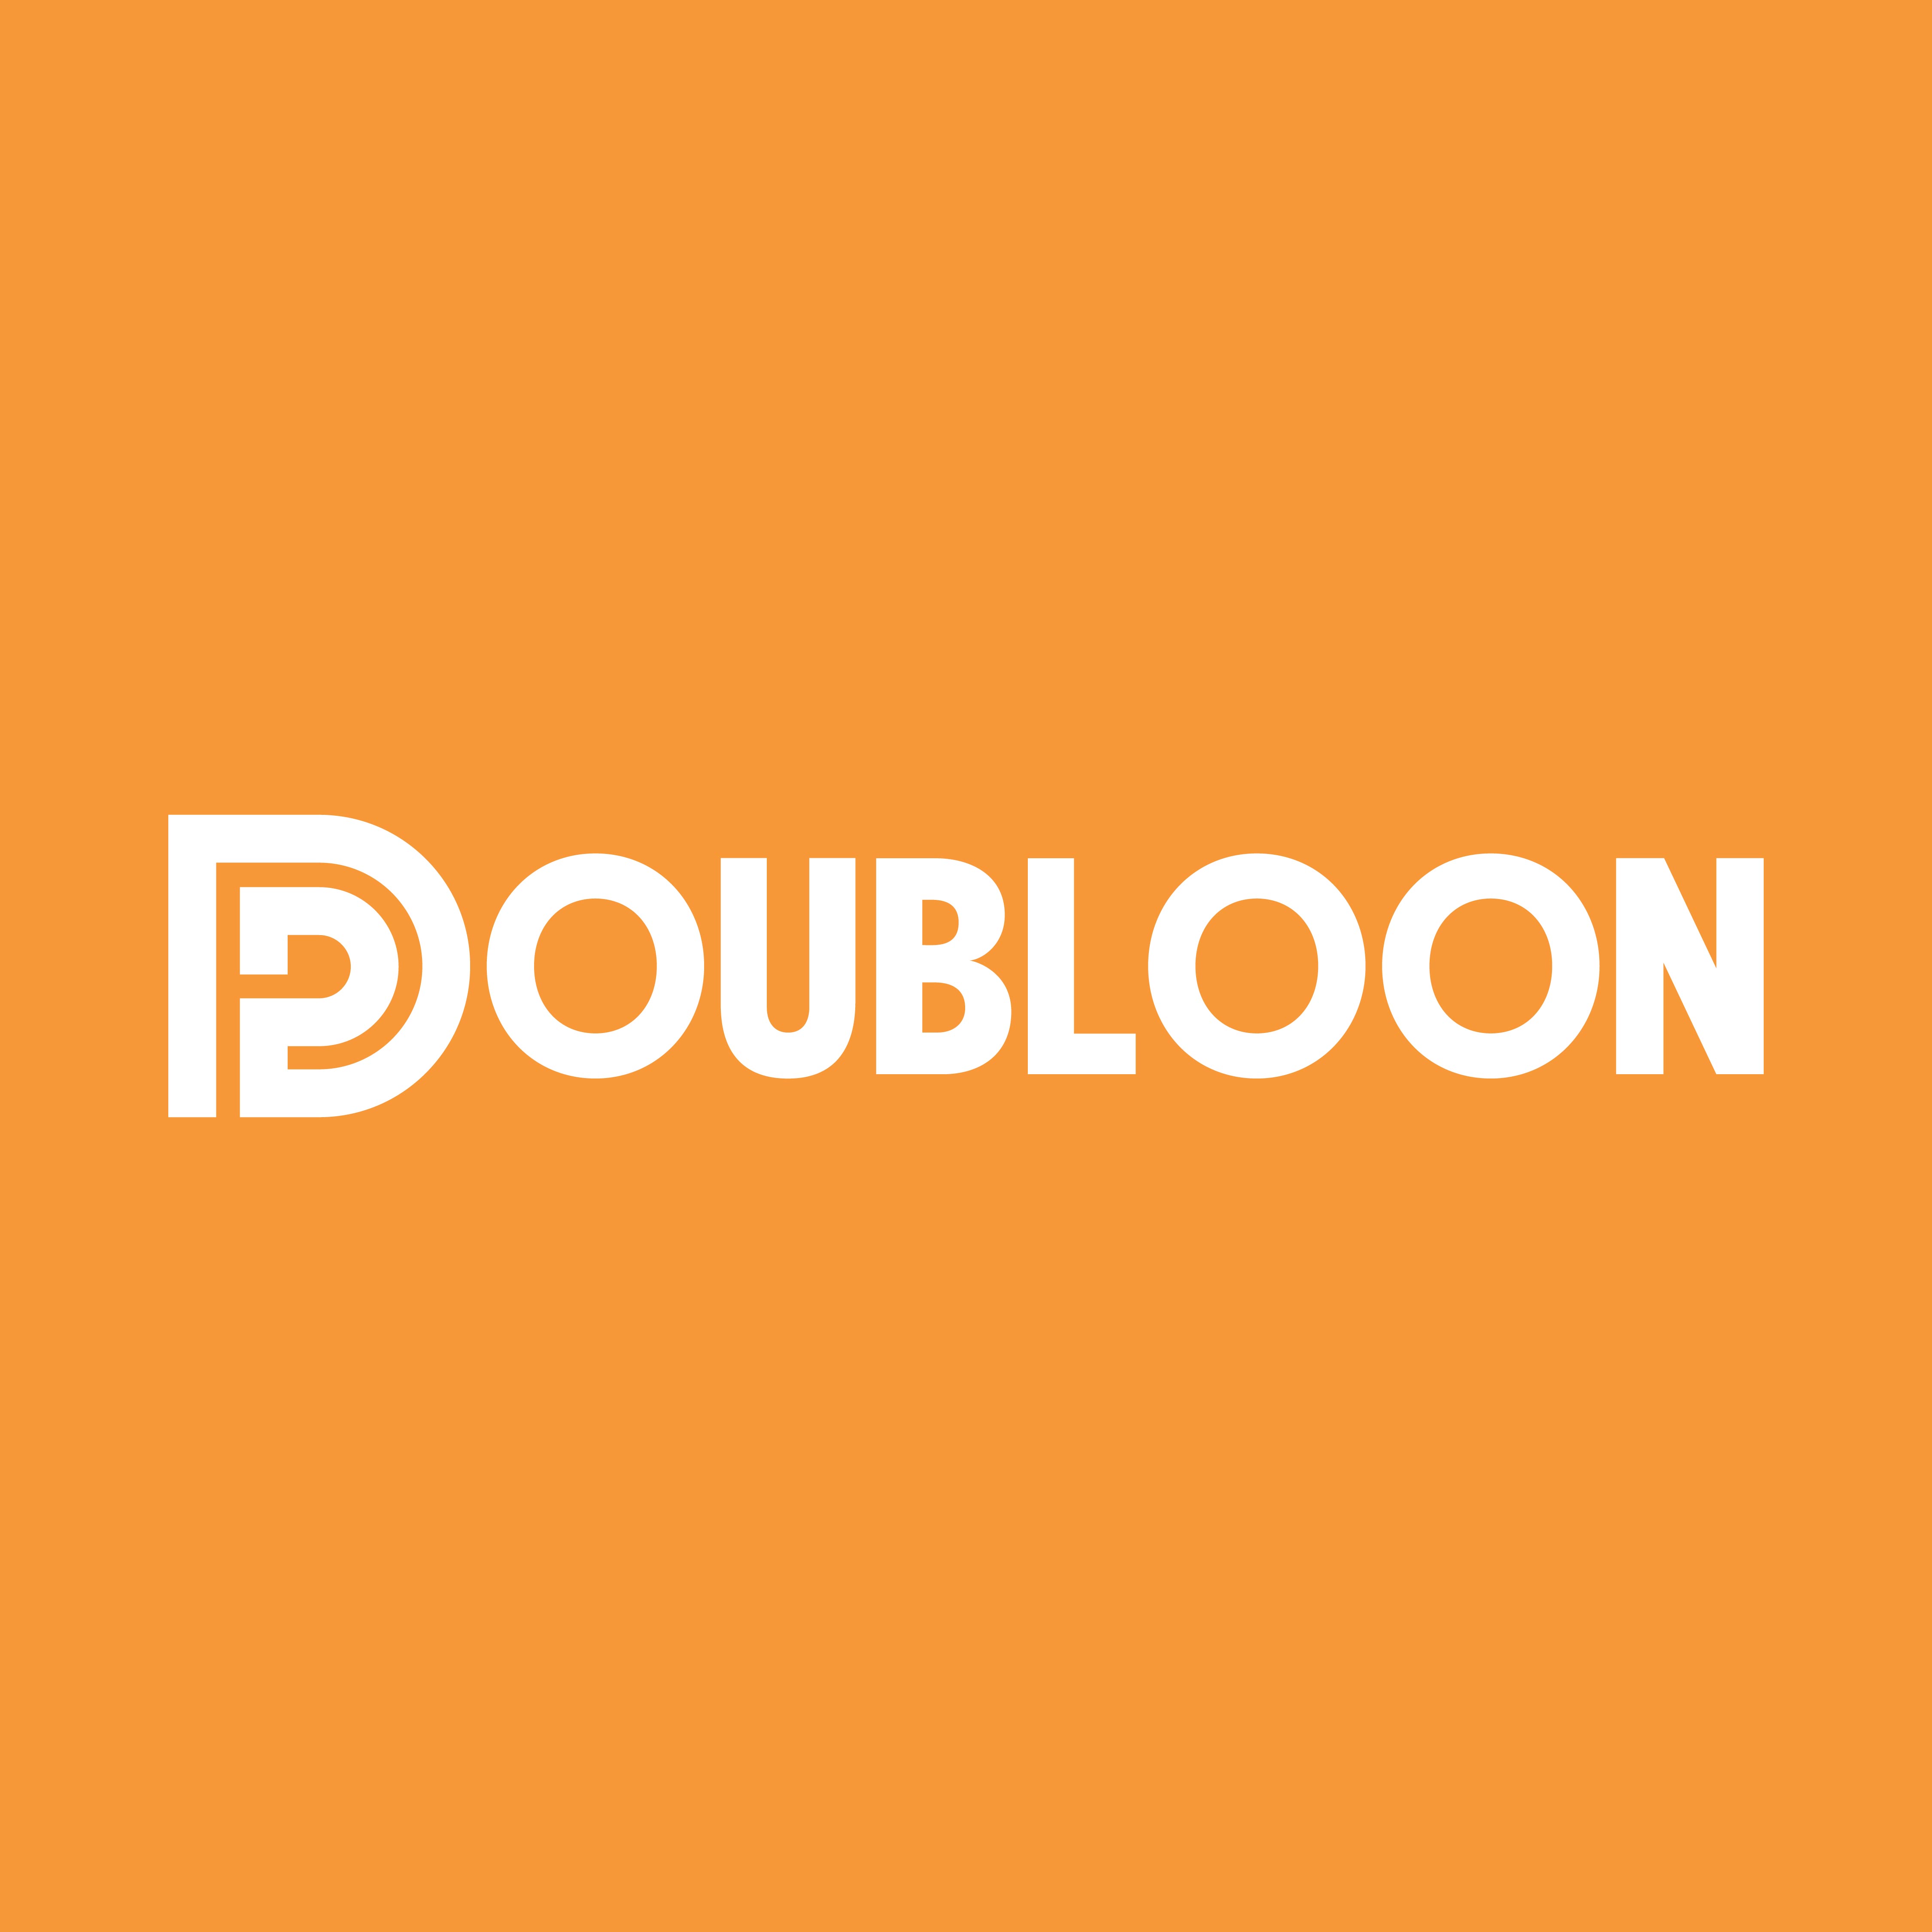 Two Doubloon Logo